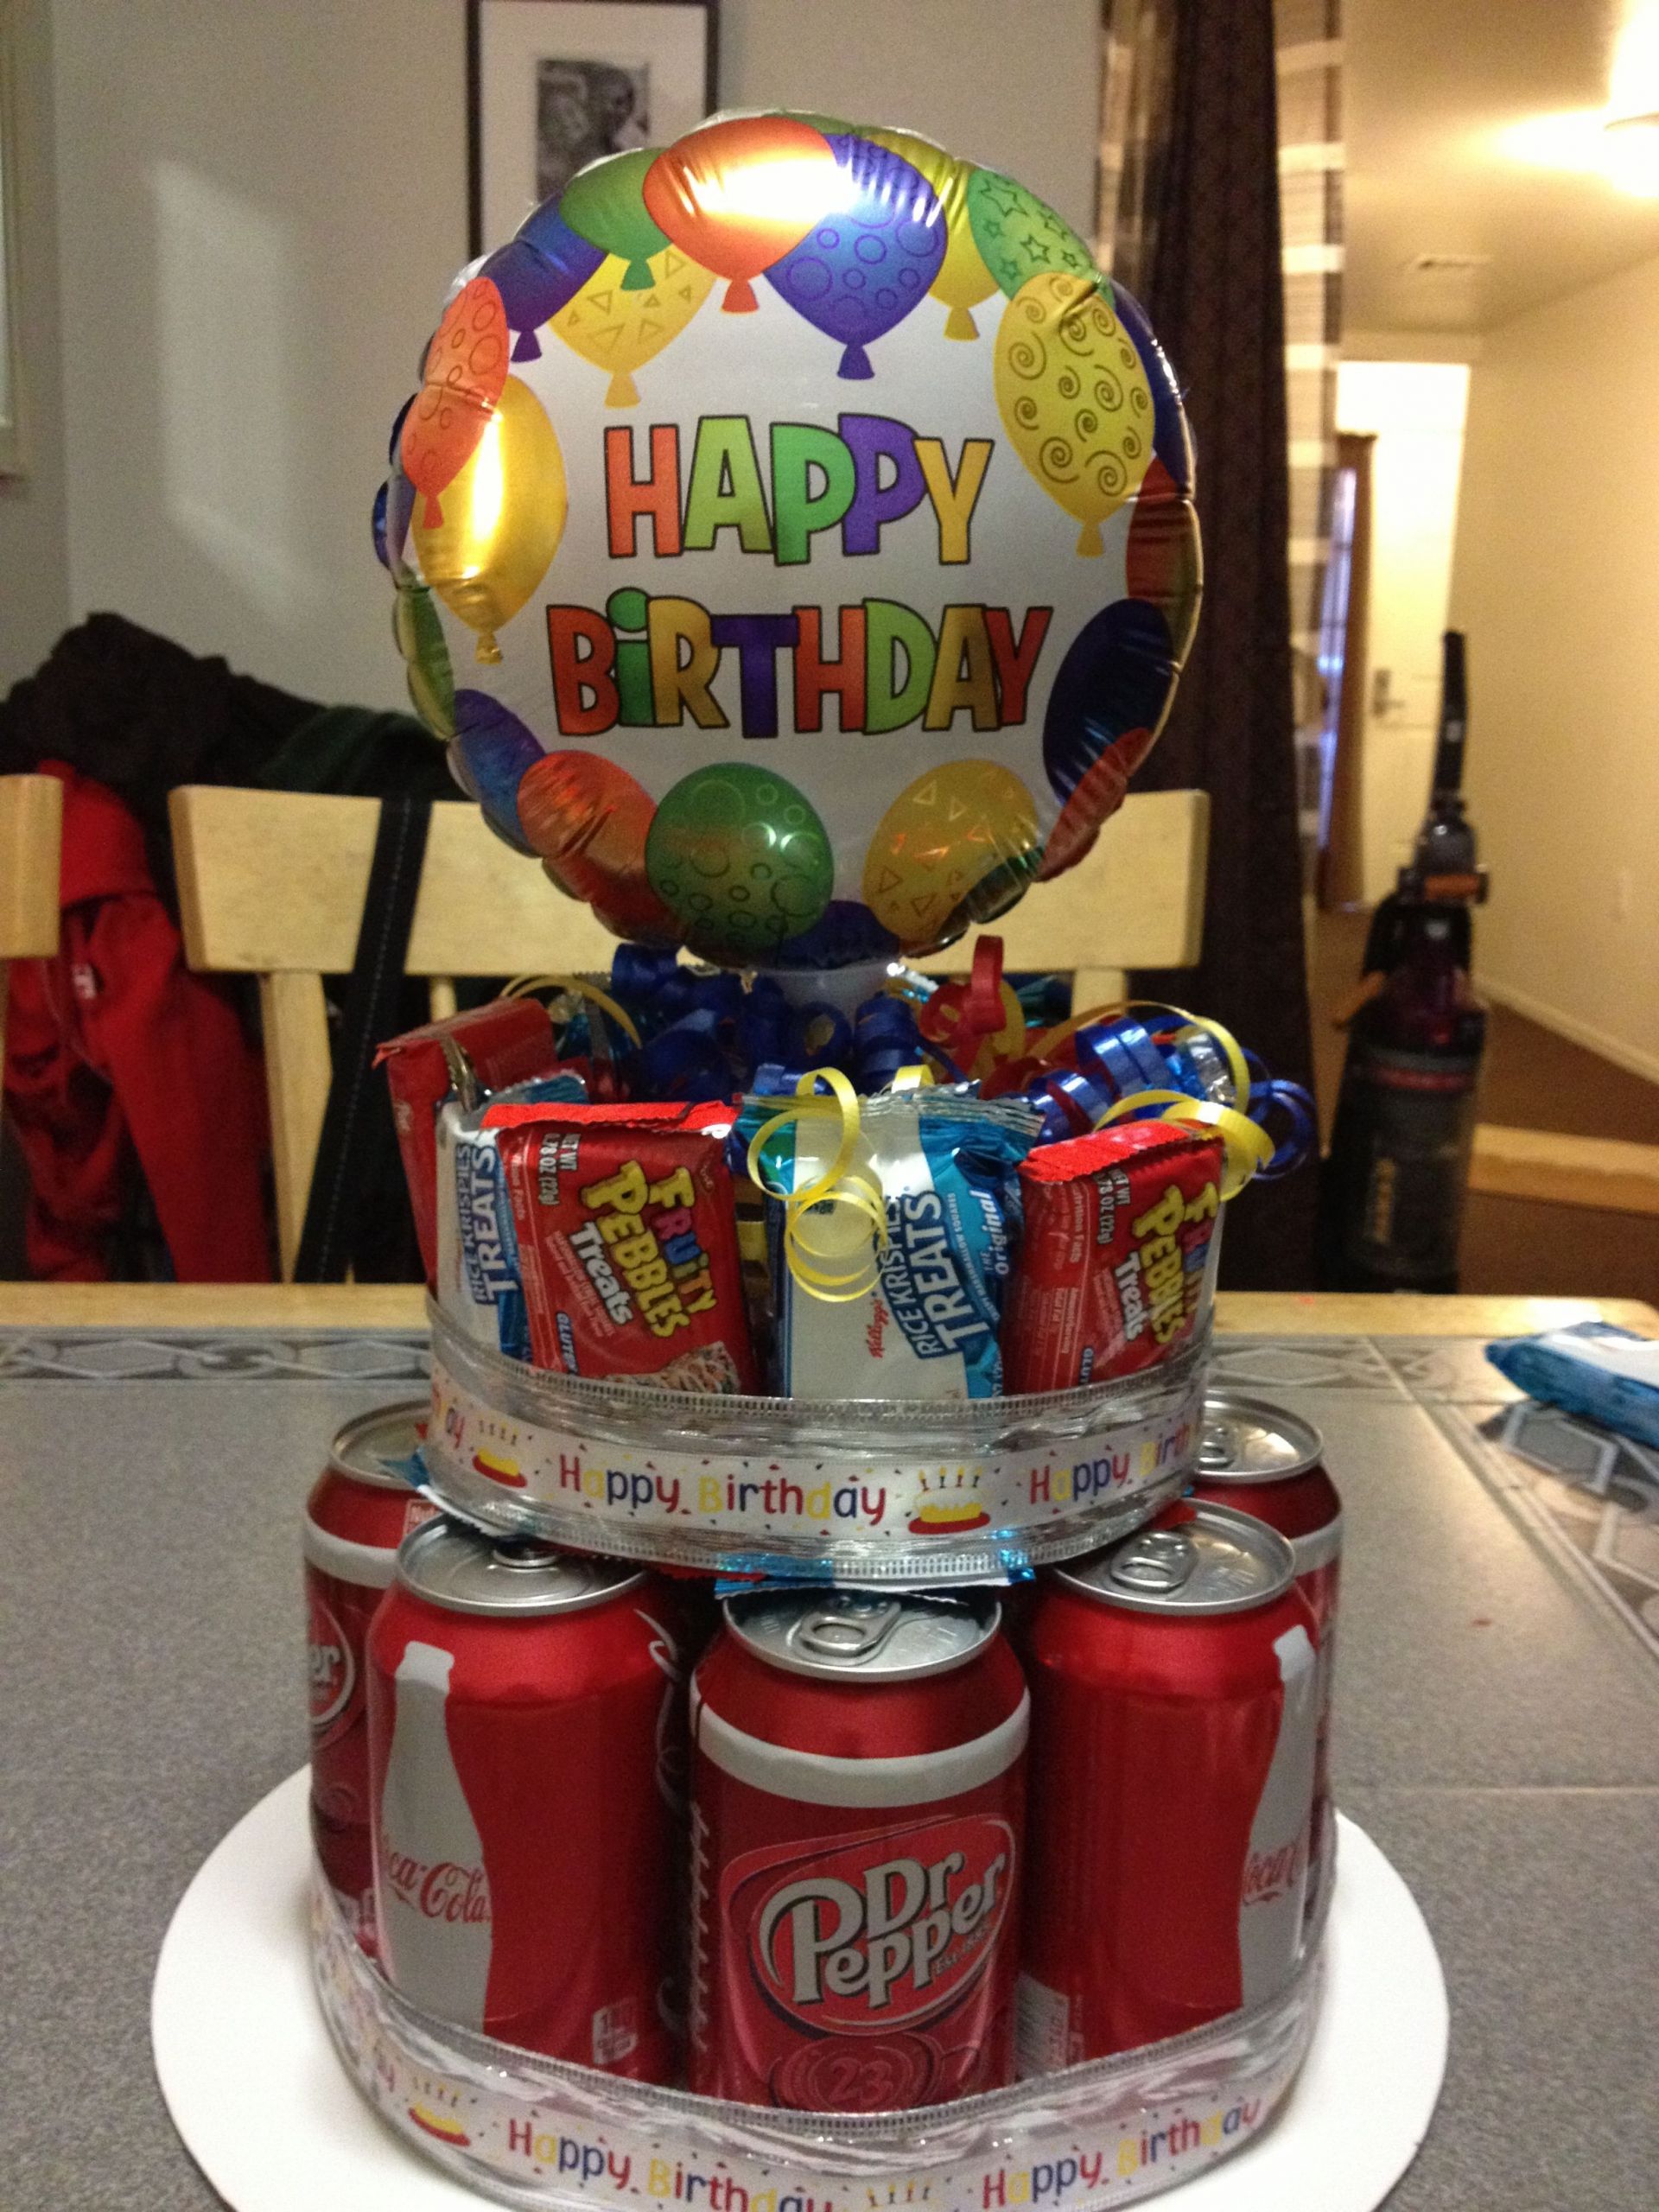 14 Year Old Birthday Gift Ideas
 Birthday cake for my 14 year old son I got this idea from